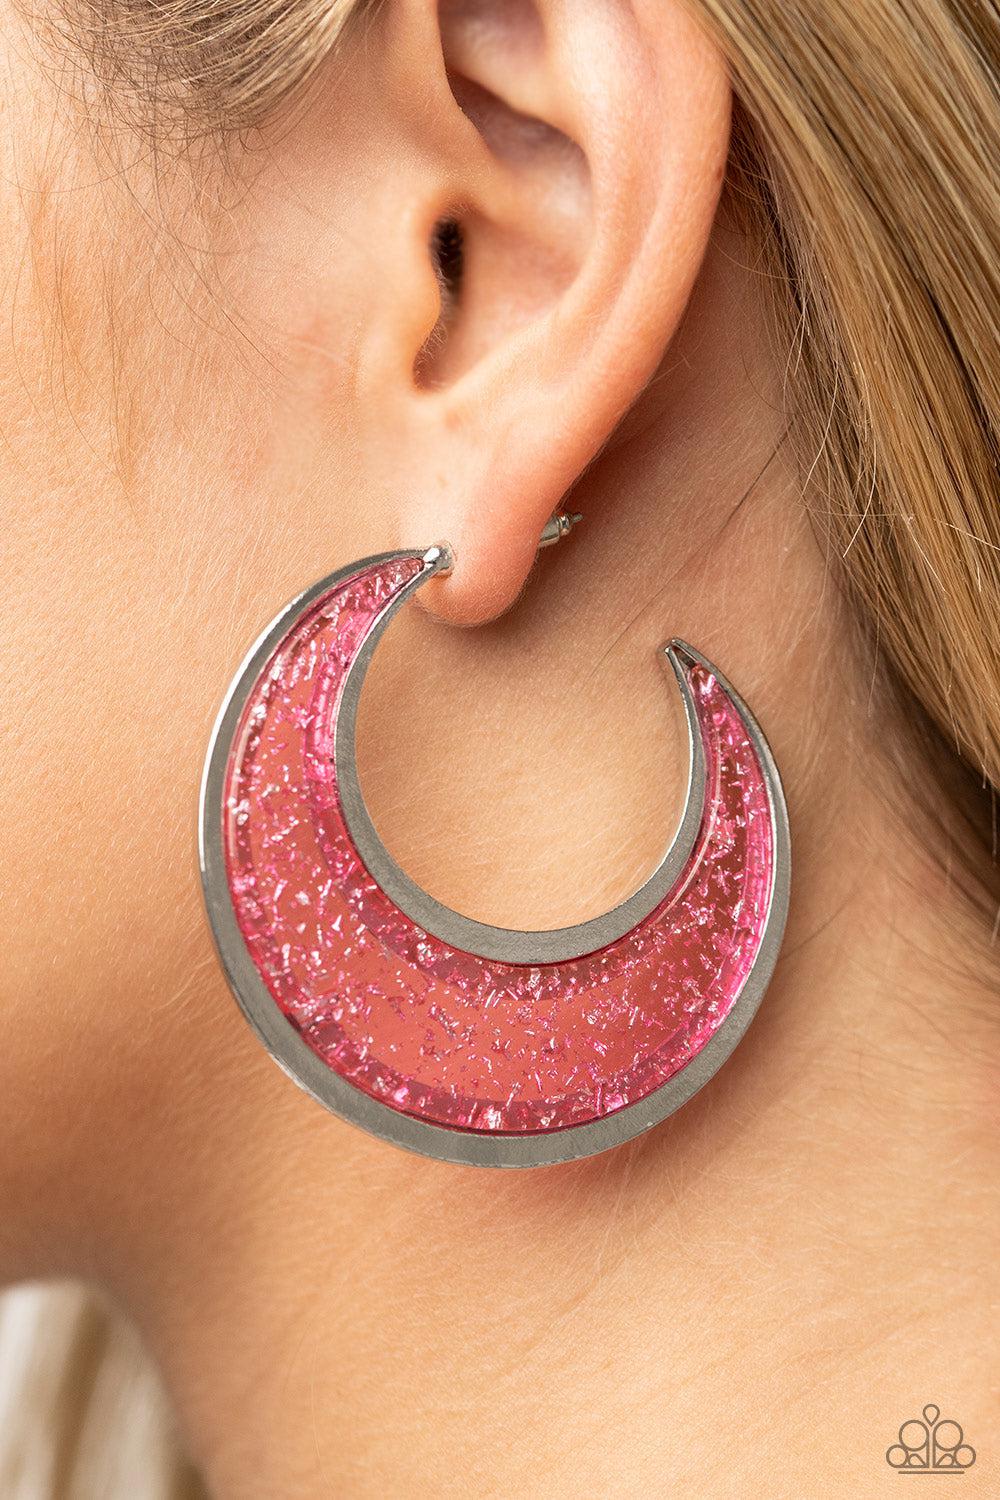 Charismatically Curvy Pink Acrylic Hoop Earrings - Paparazzi Accessories-on model - CarasShop.com - $5 Jewelry by Cara Jewels